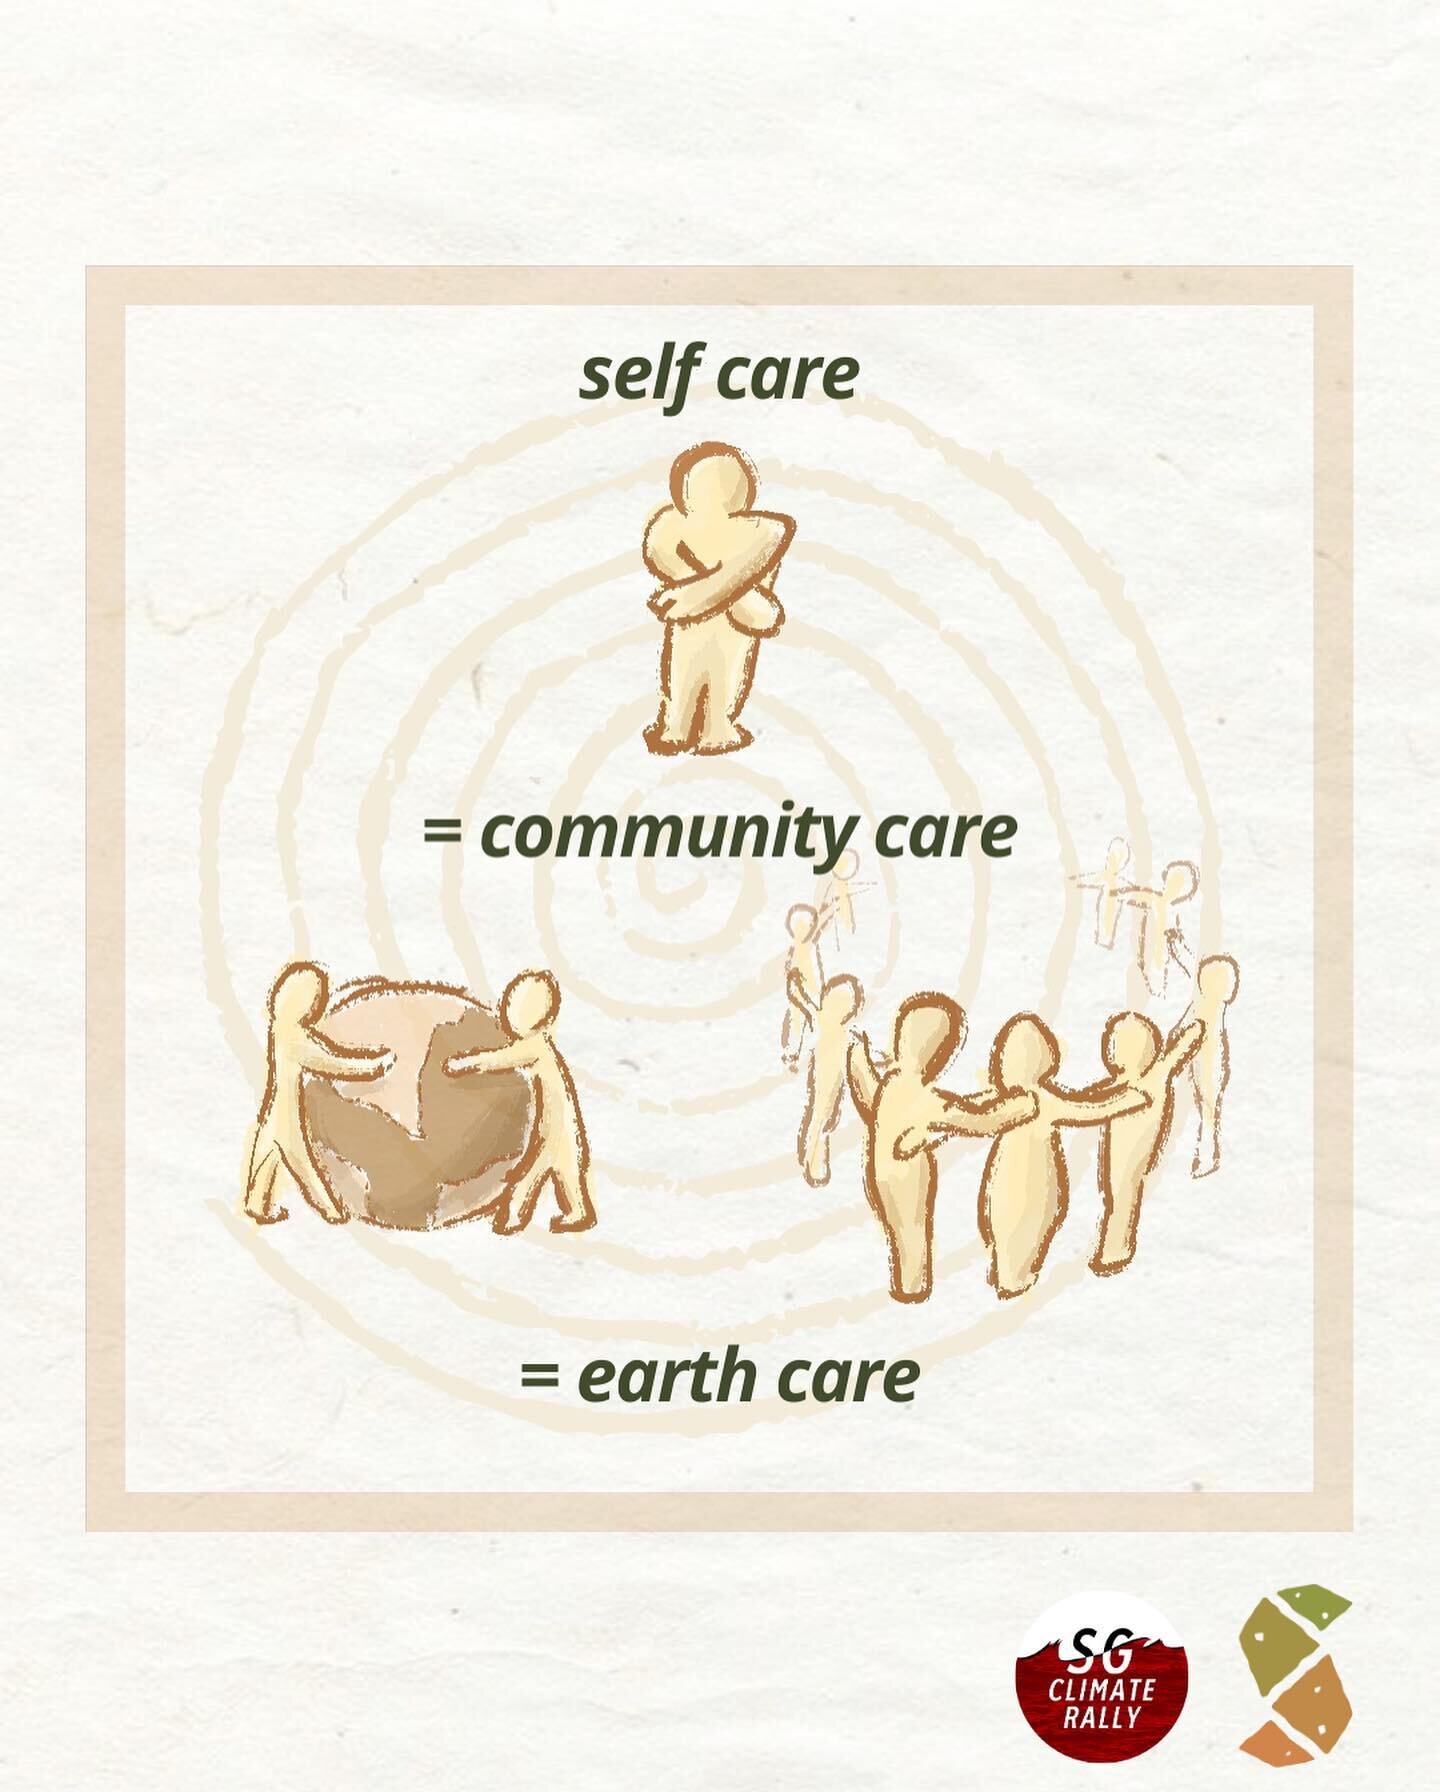 Today, as we celebrate Earth Day 🌏 and Hari Raya Puasa, we would like to affirm the importance of care for ourselves, our communities, and our earth. Taking care of each other means sustaining our movements for the long run and preventing burnout so